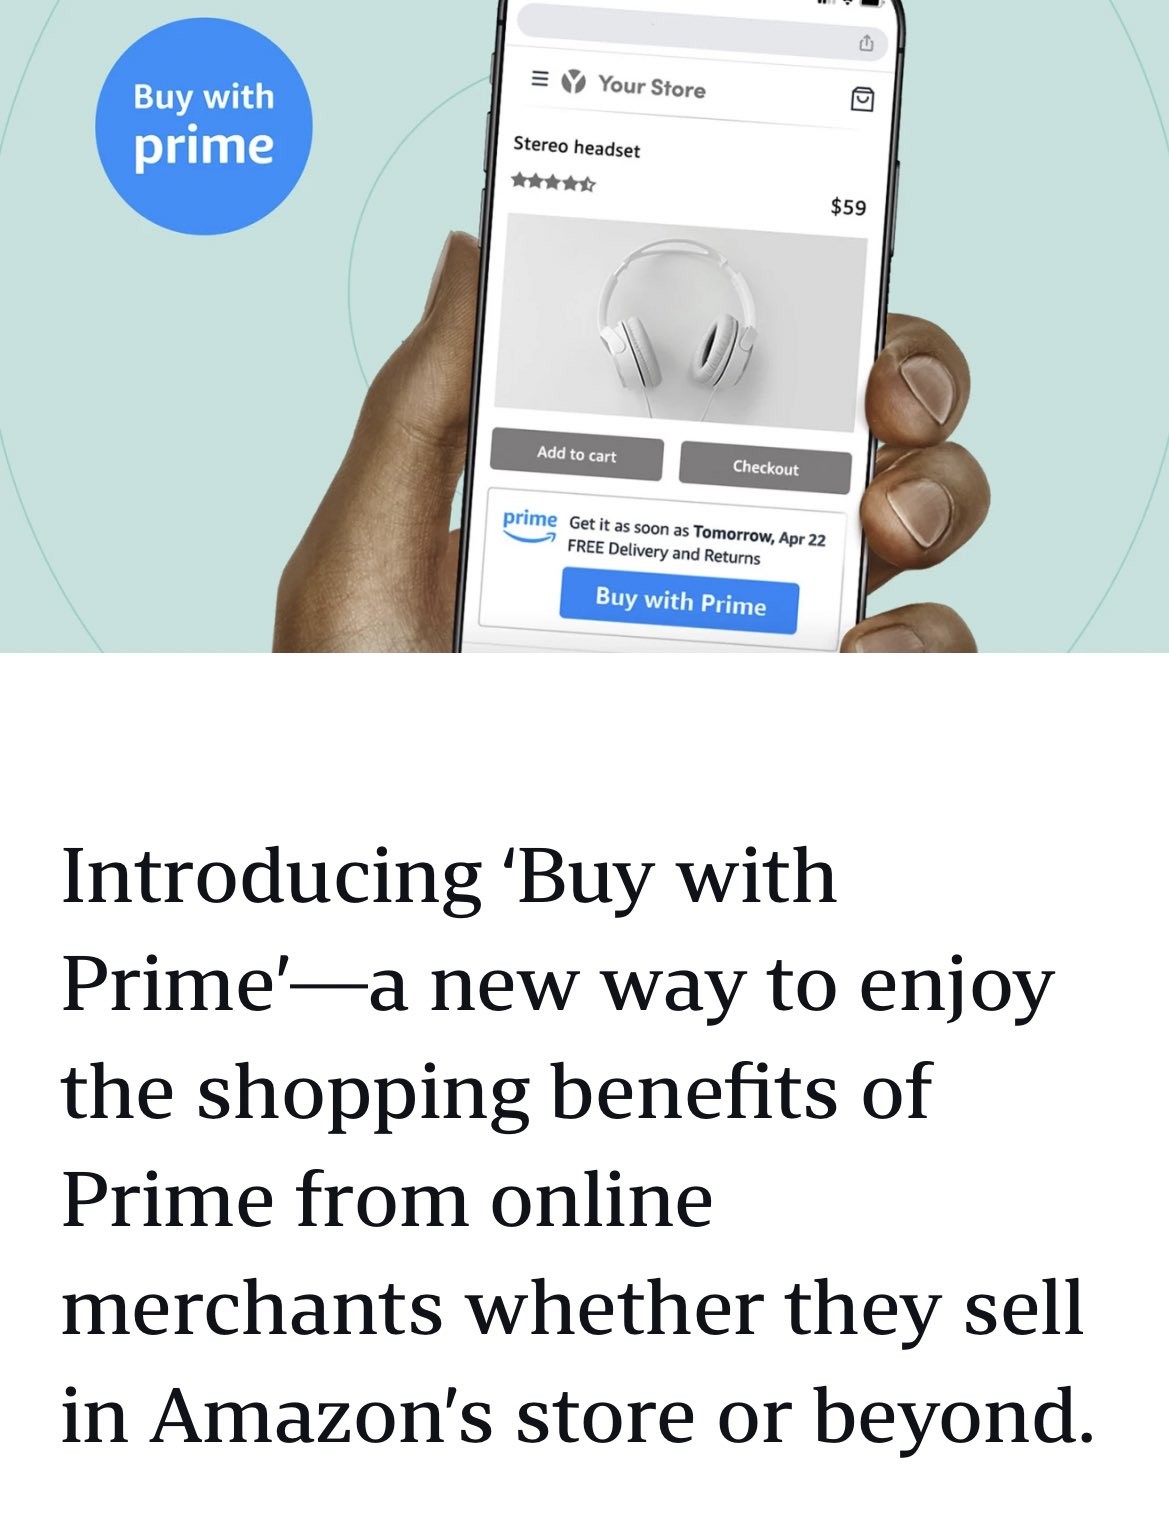 Amazon will allow merchants to sell Prime-eligible products on their own websites with Buy With Prime